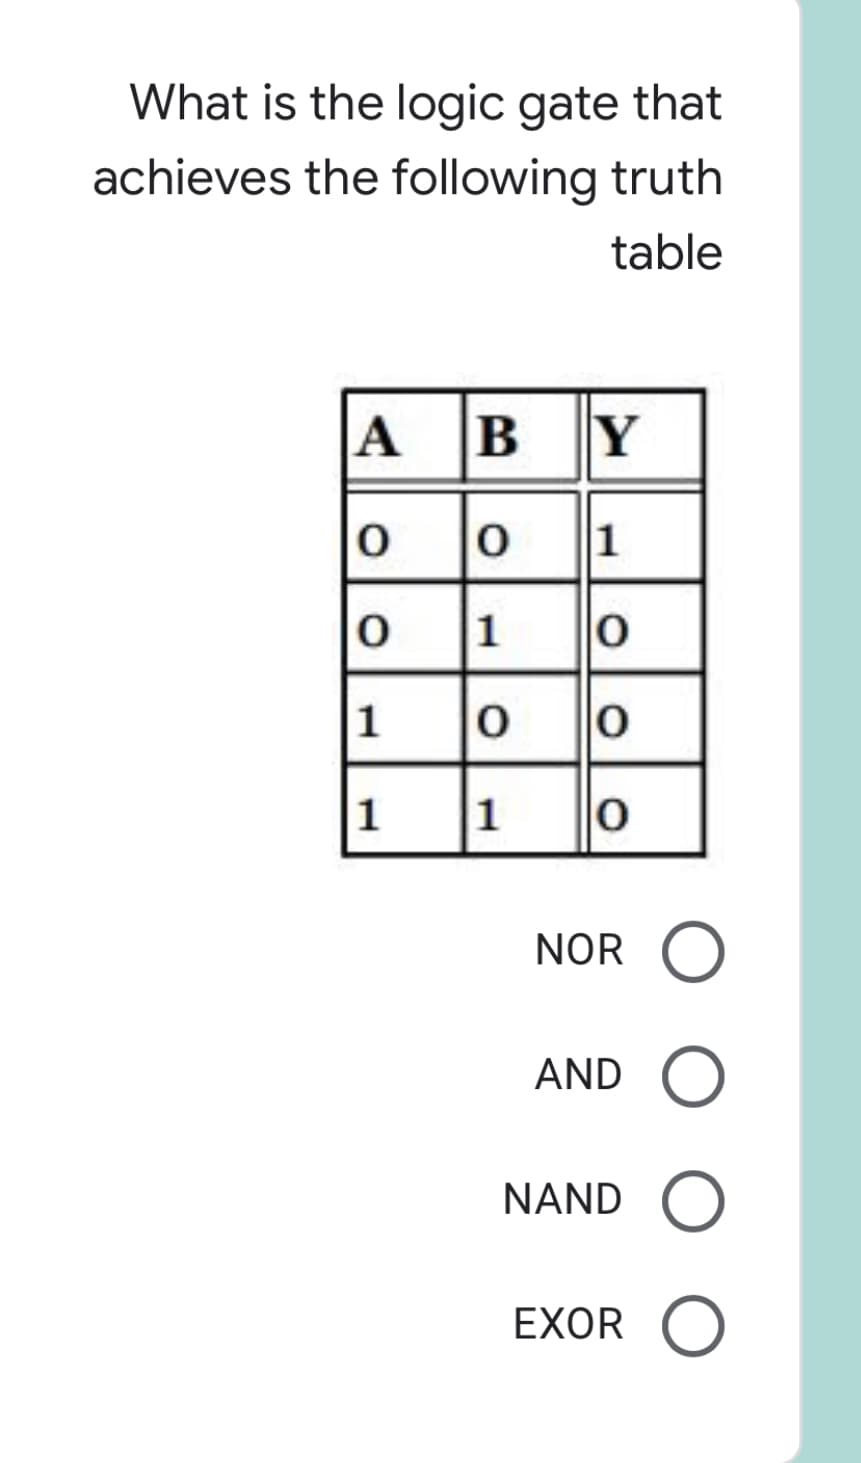 What is the logic gate that
achieves the following truth
table
A BY
oo 1
0 1 0
1
1
NOR
AND O
NAND O
EXOR O
